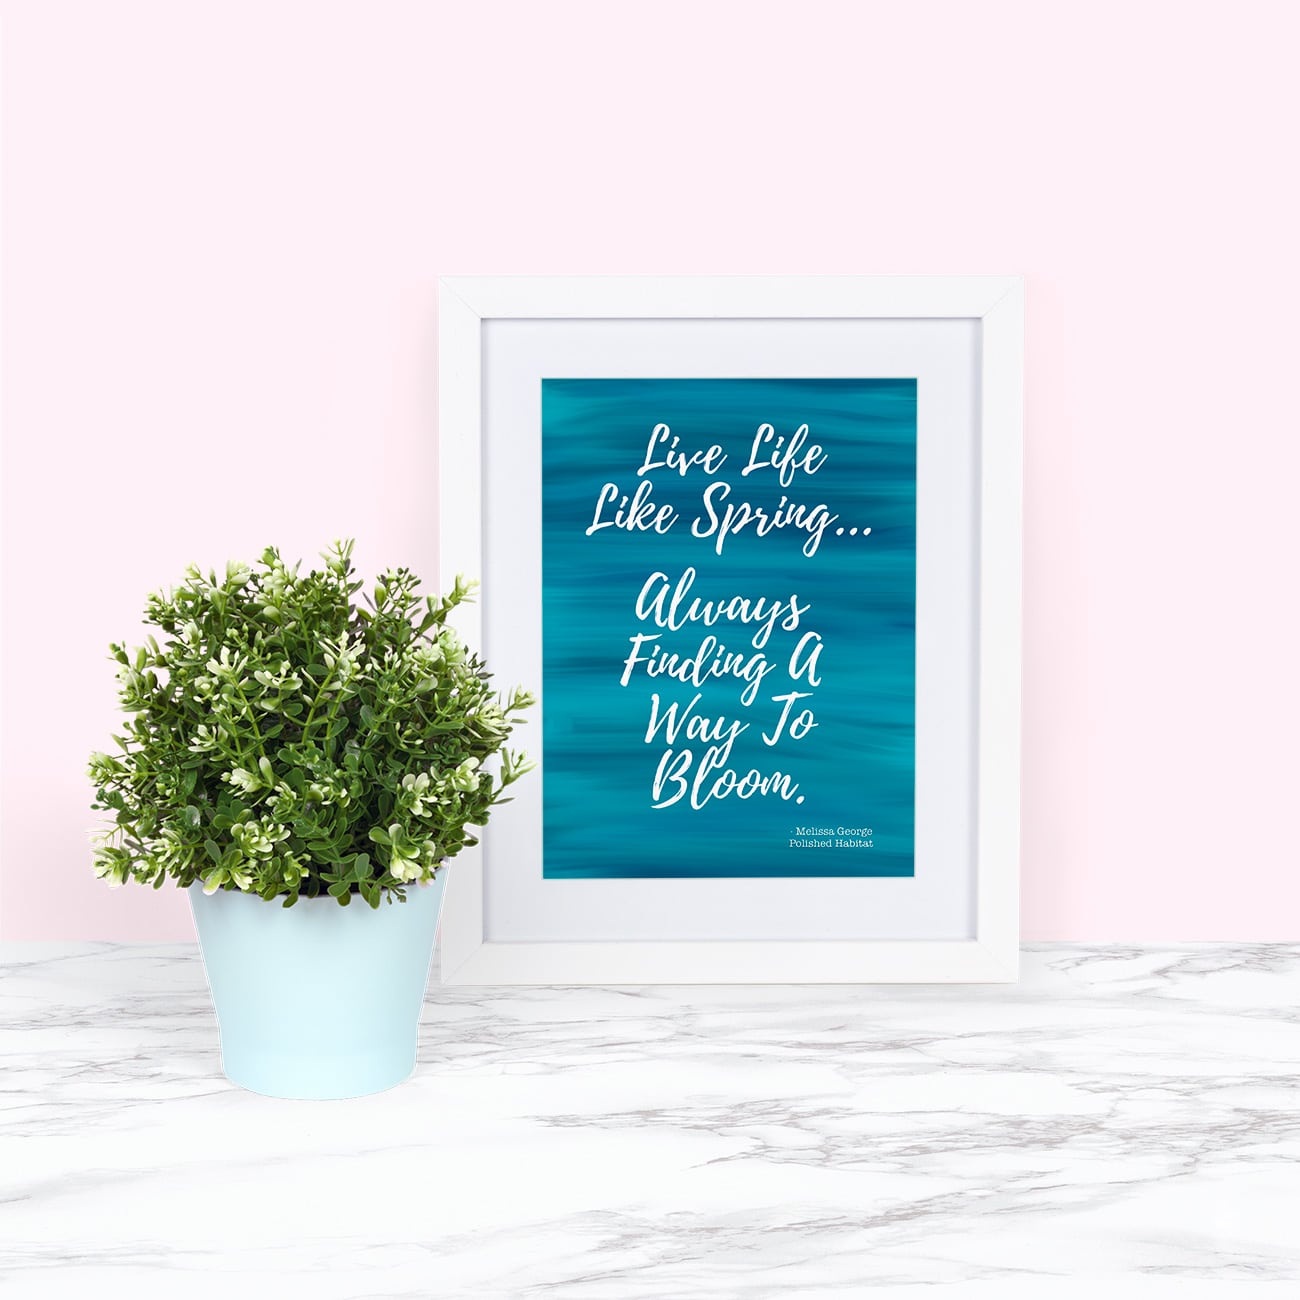 Quote in White Frame: Live Life Like Spring, Always Finding a Way to Bloom - FREE PRINTABLE ART FOR SPRING!